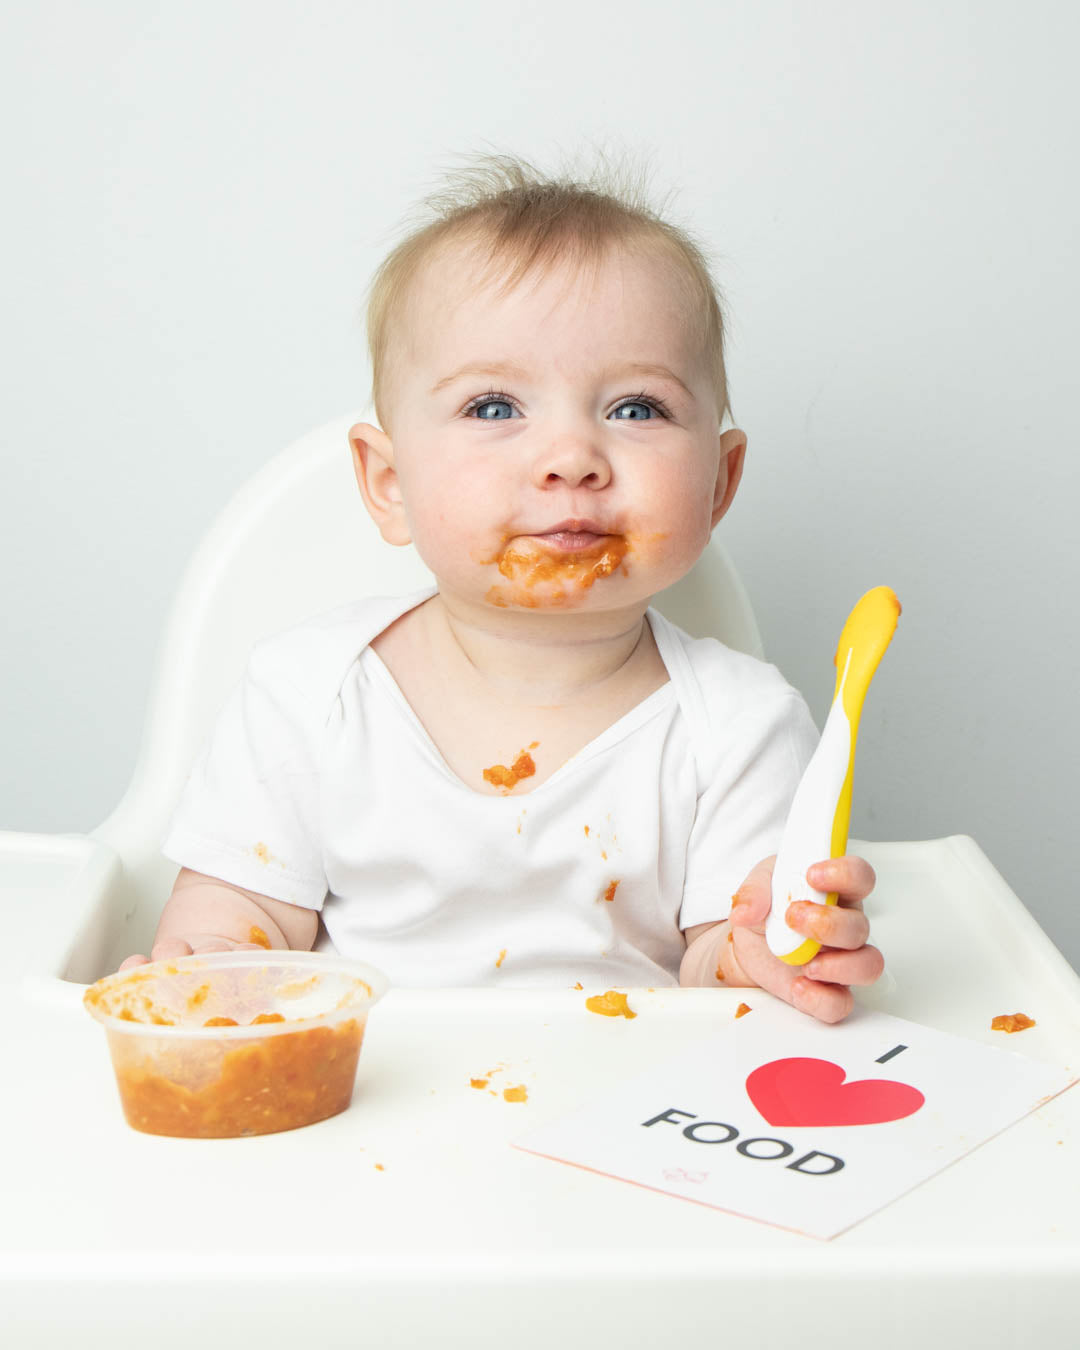 When & How to Introduce Utensils to Your Baby or Toddler